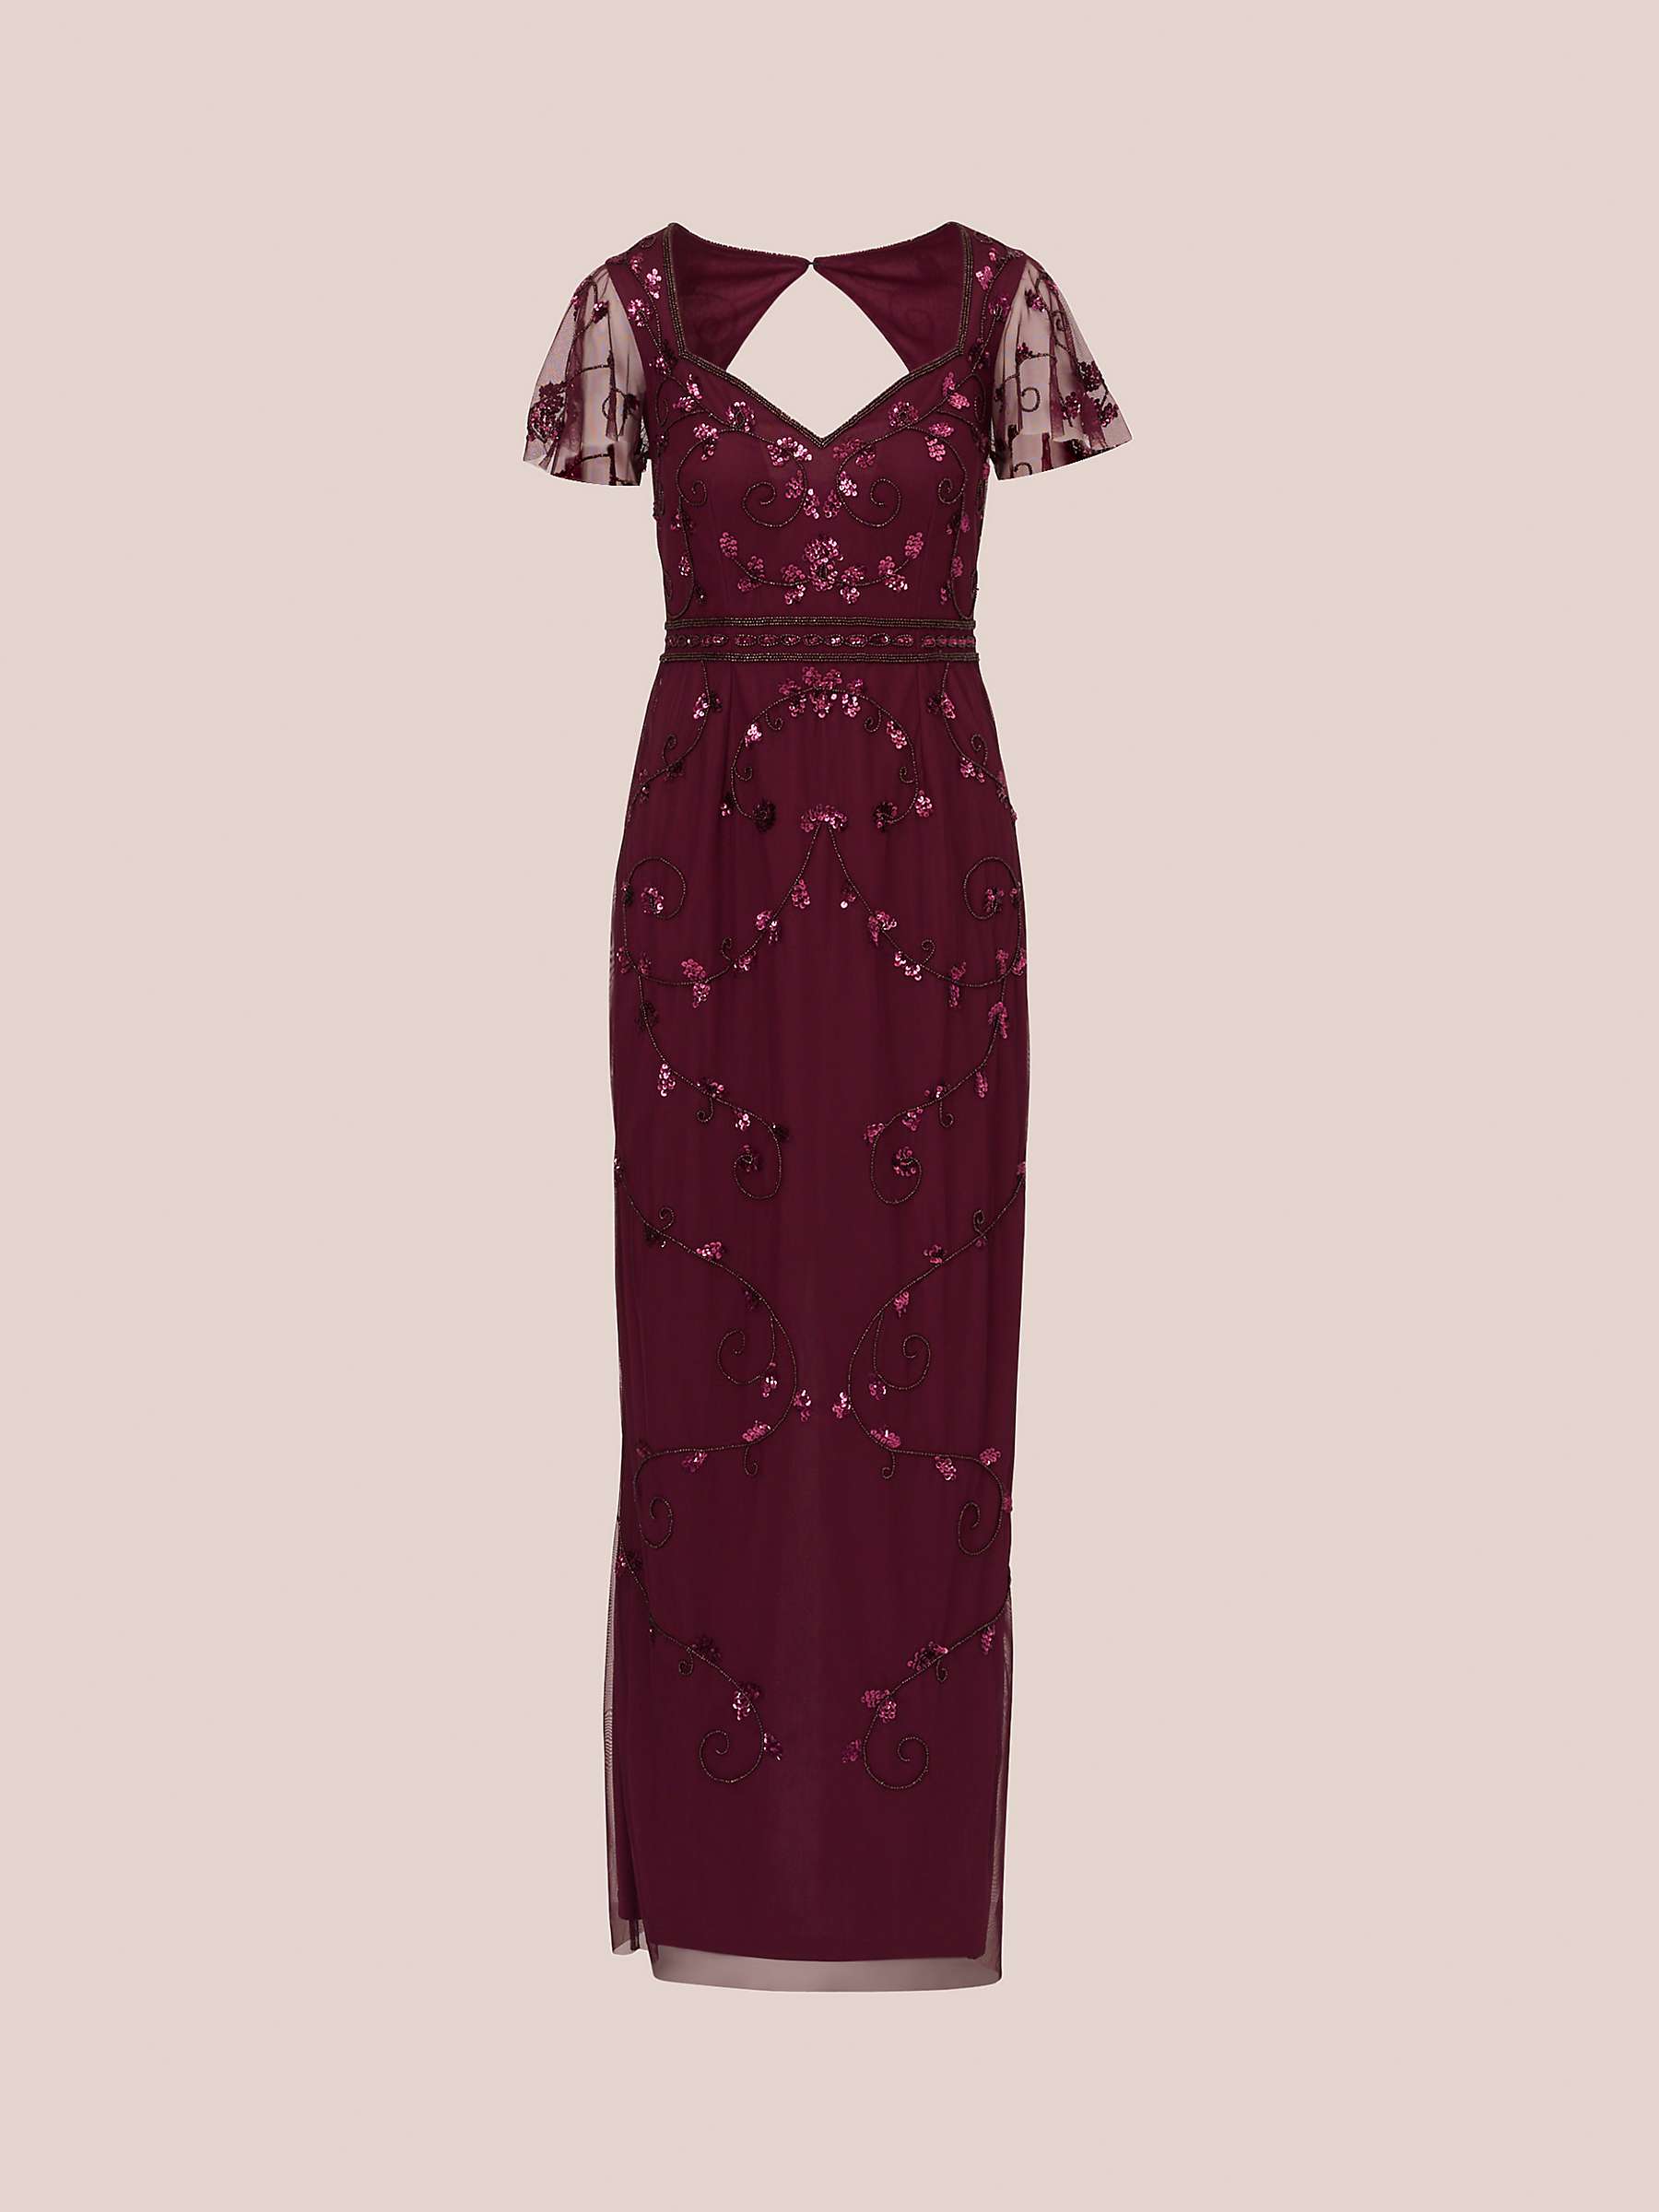 Buy Adrianna Papell Papell Studio Beaded Maxi Dress, Cassis Online at johnlewis.com